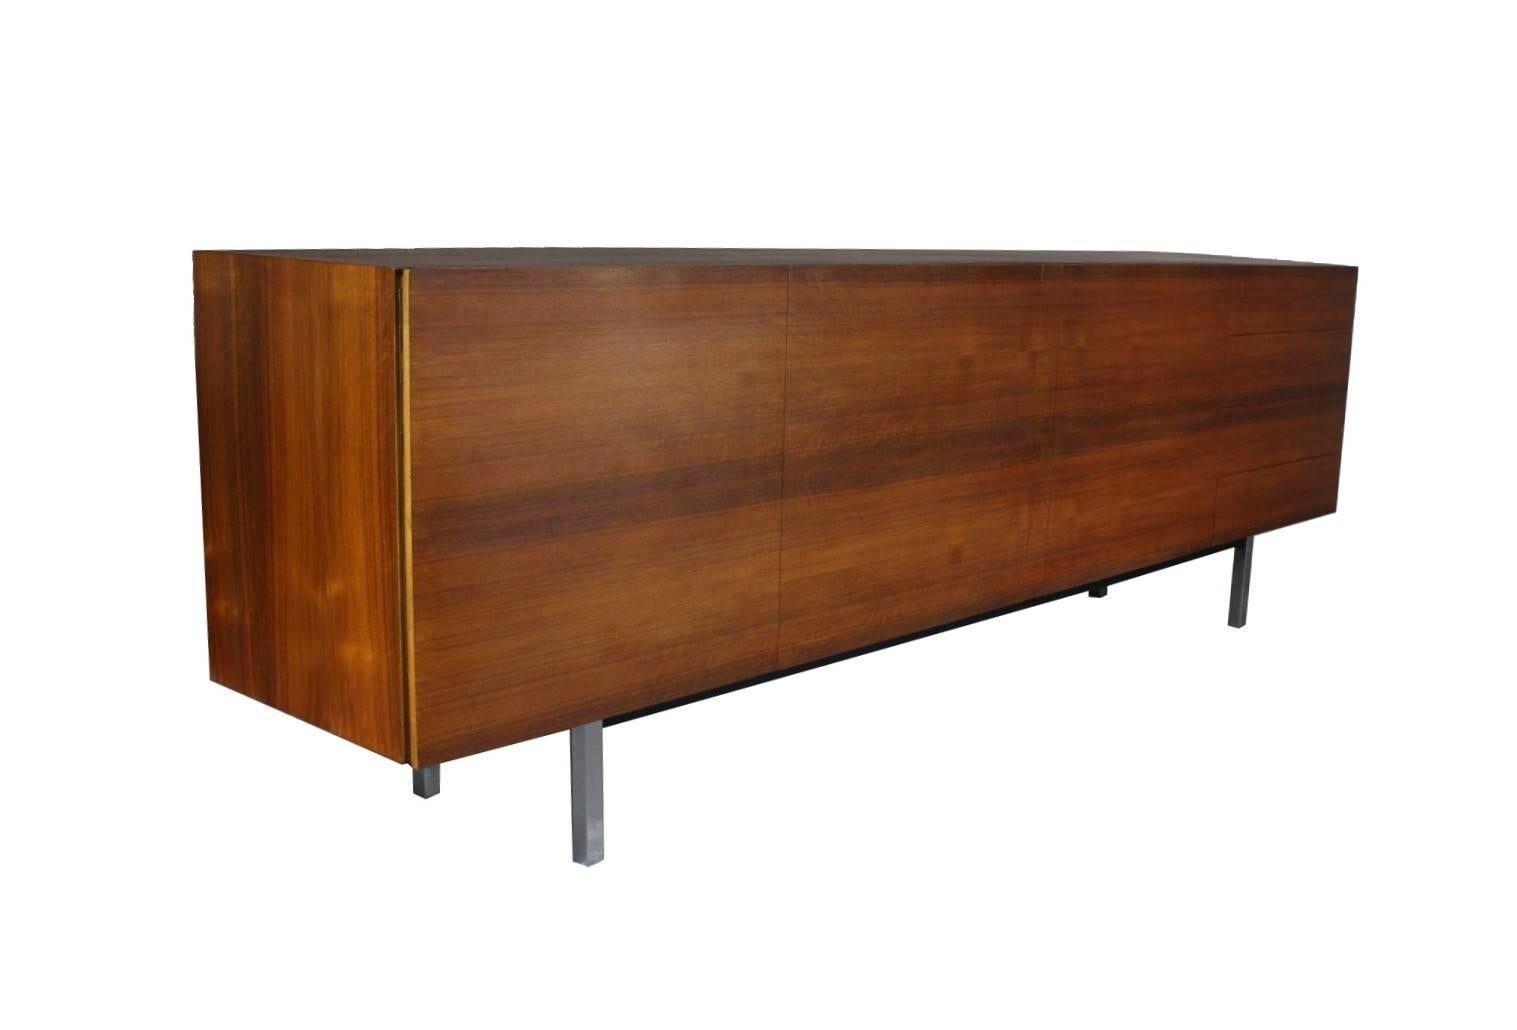 Long sideboard from the 1960s, made in Switzerland. Walnut veneer, steel base. The sideboard is in good original condition.